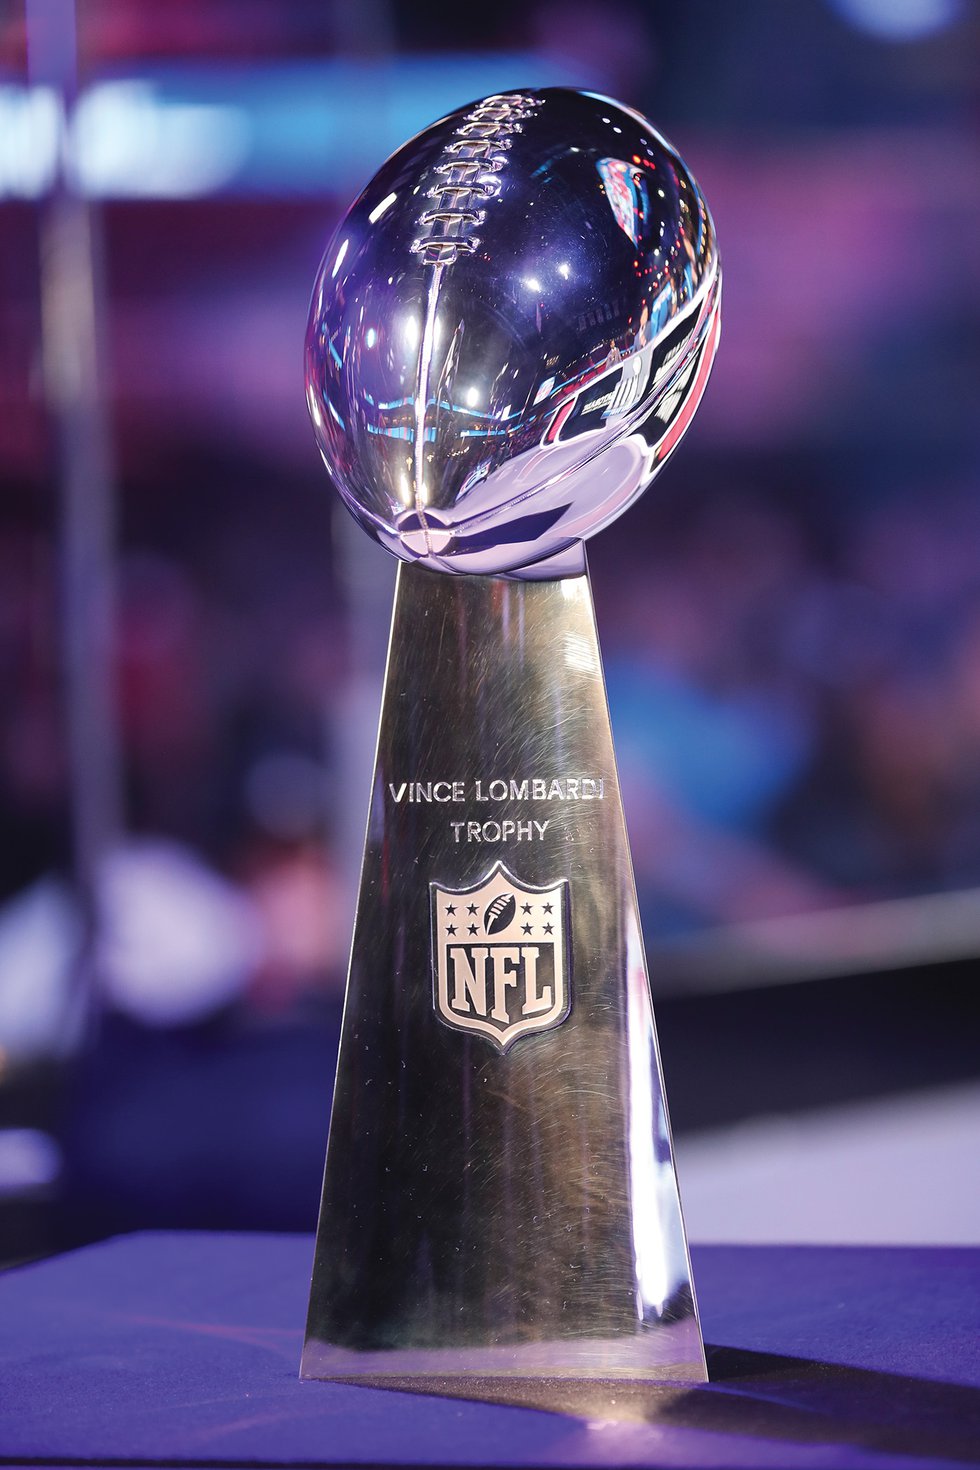 How Much Does the Lombardi Trophy Weigh?